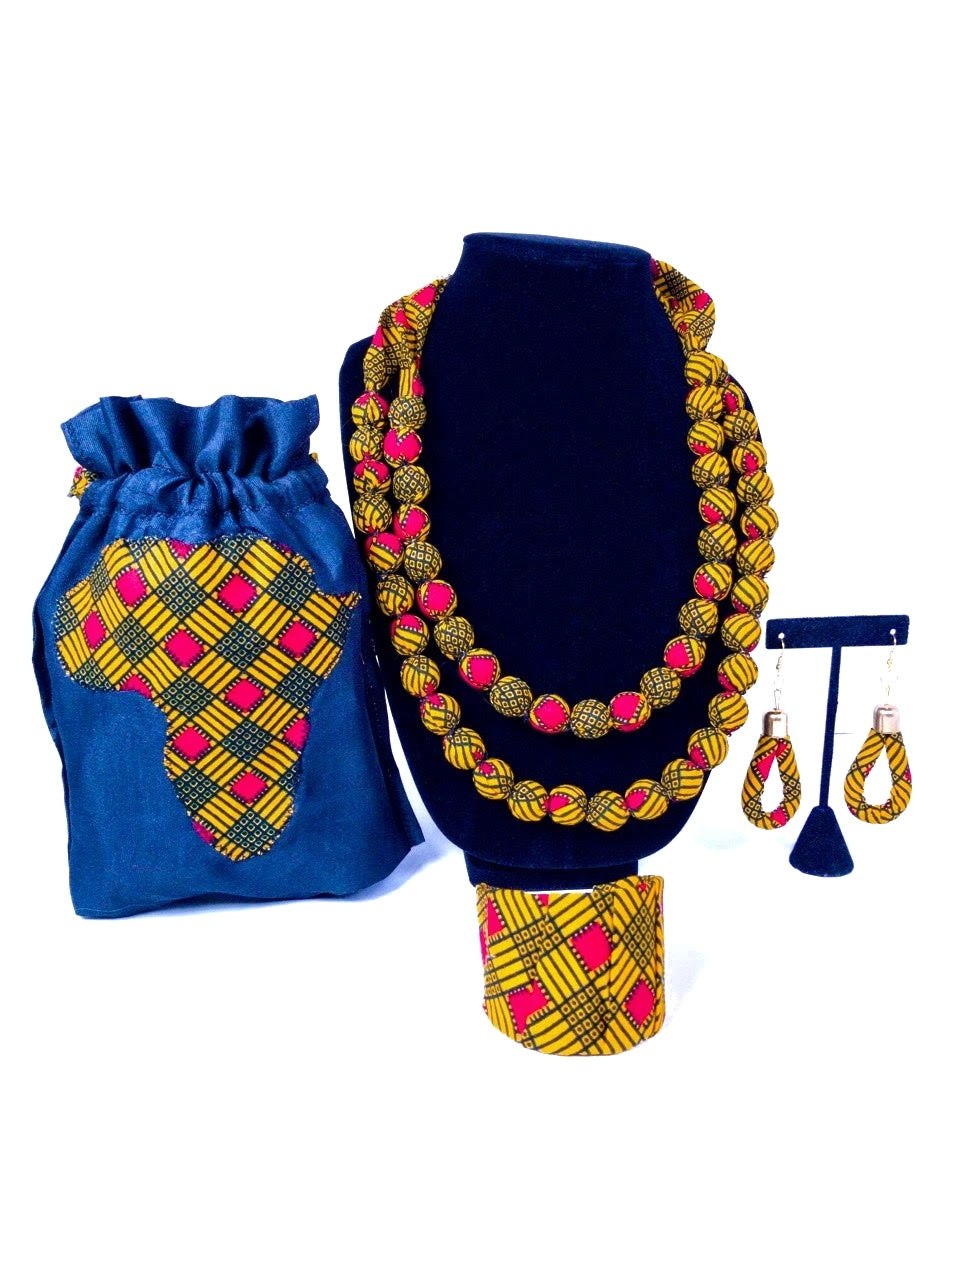 Ase, 3-Piece Printed Necklace, Cuff and Earring Set by Rosesgems Boutique